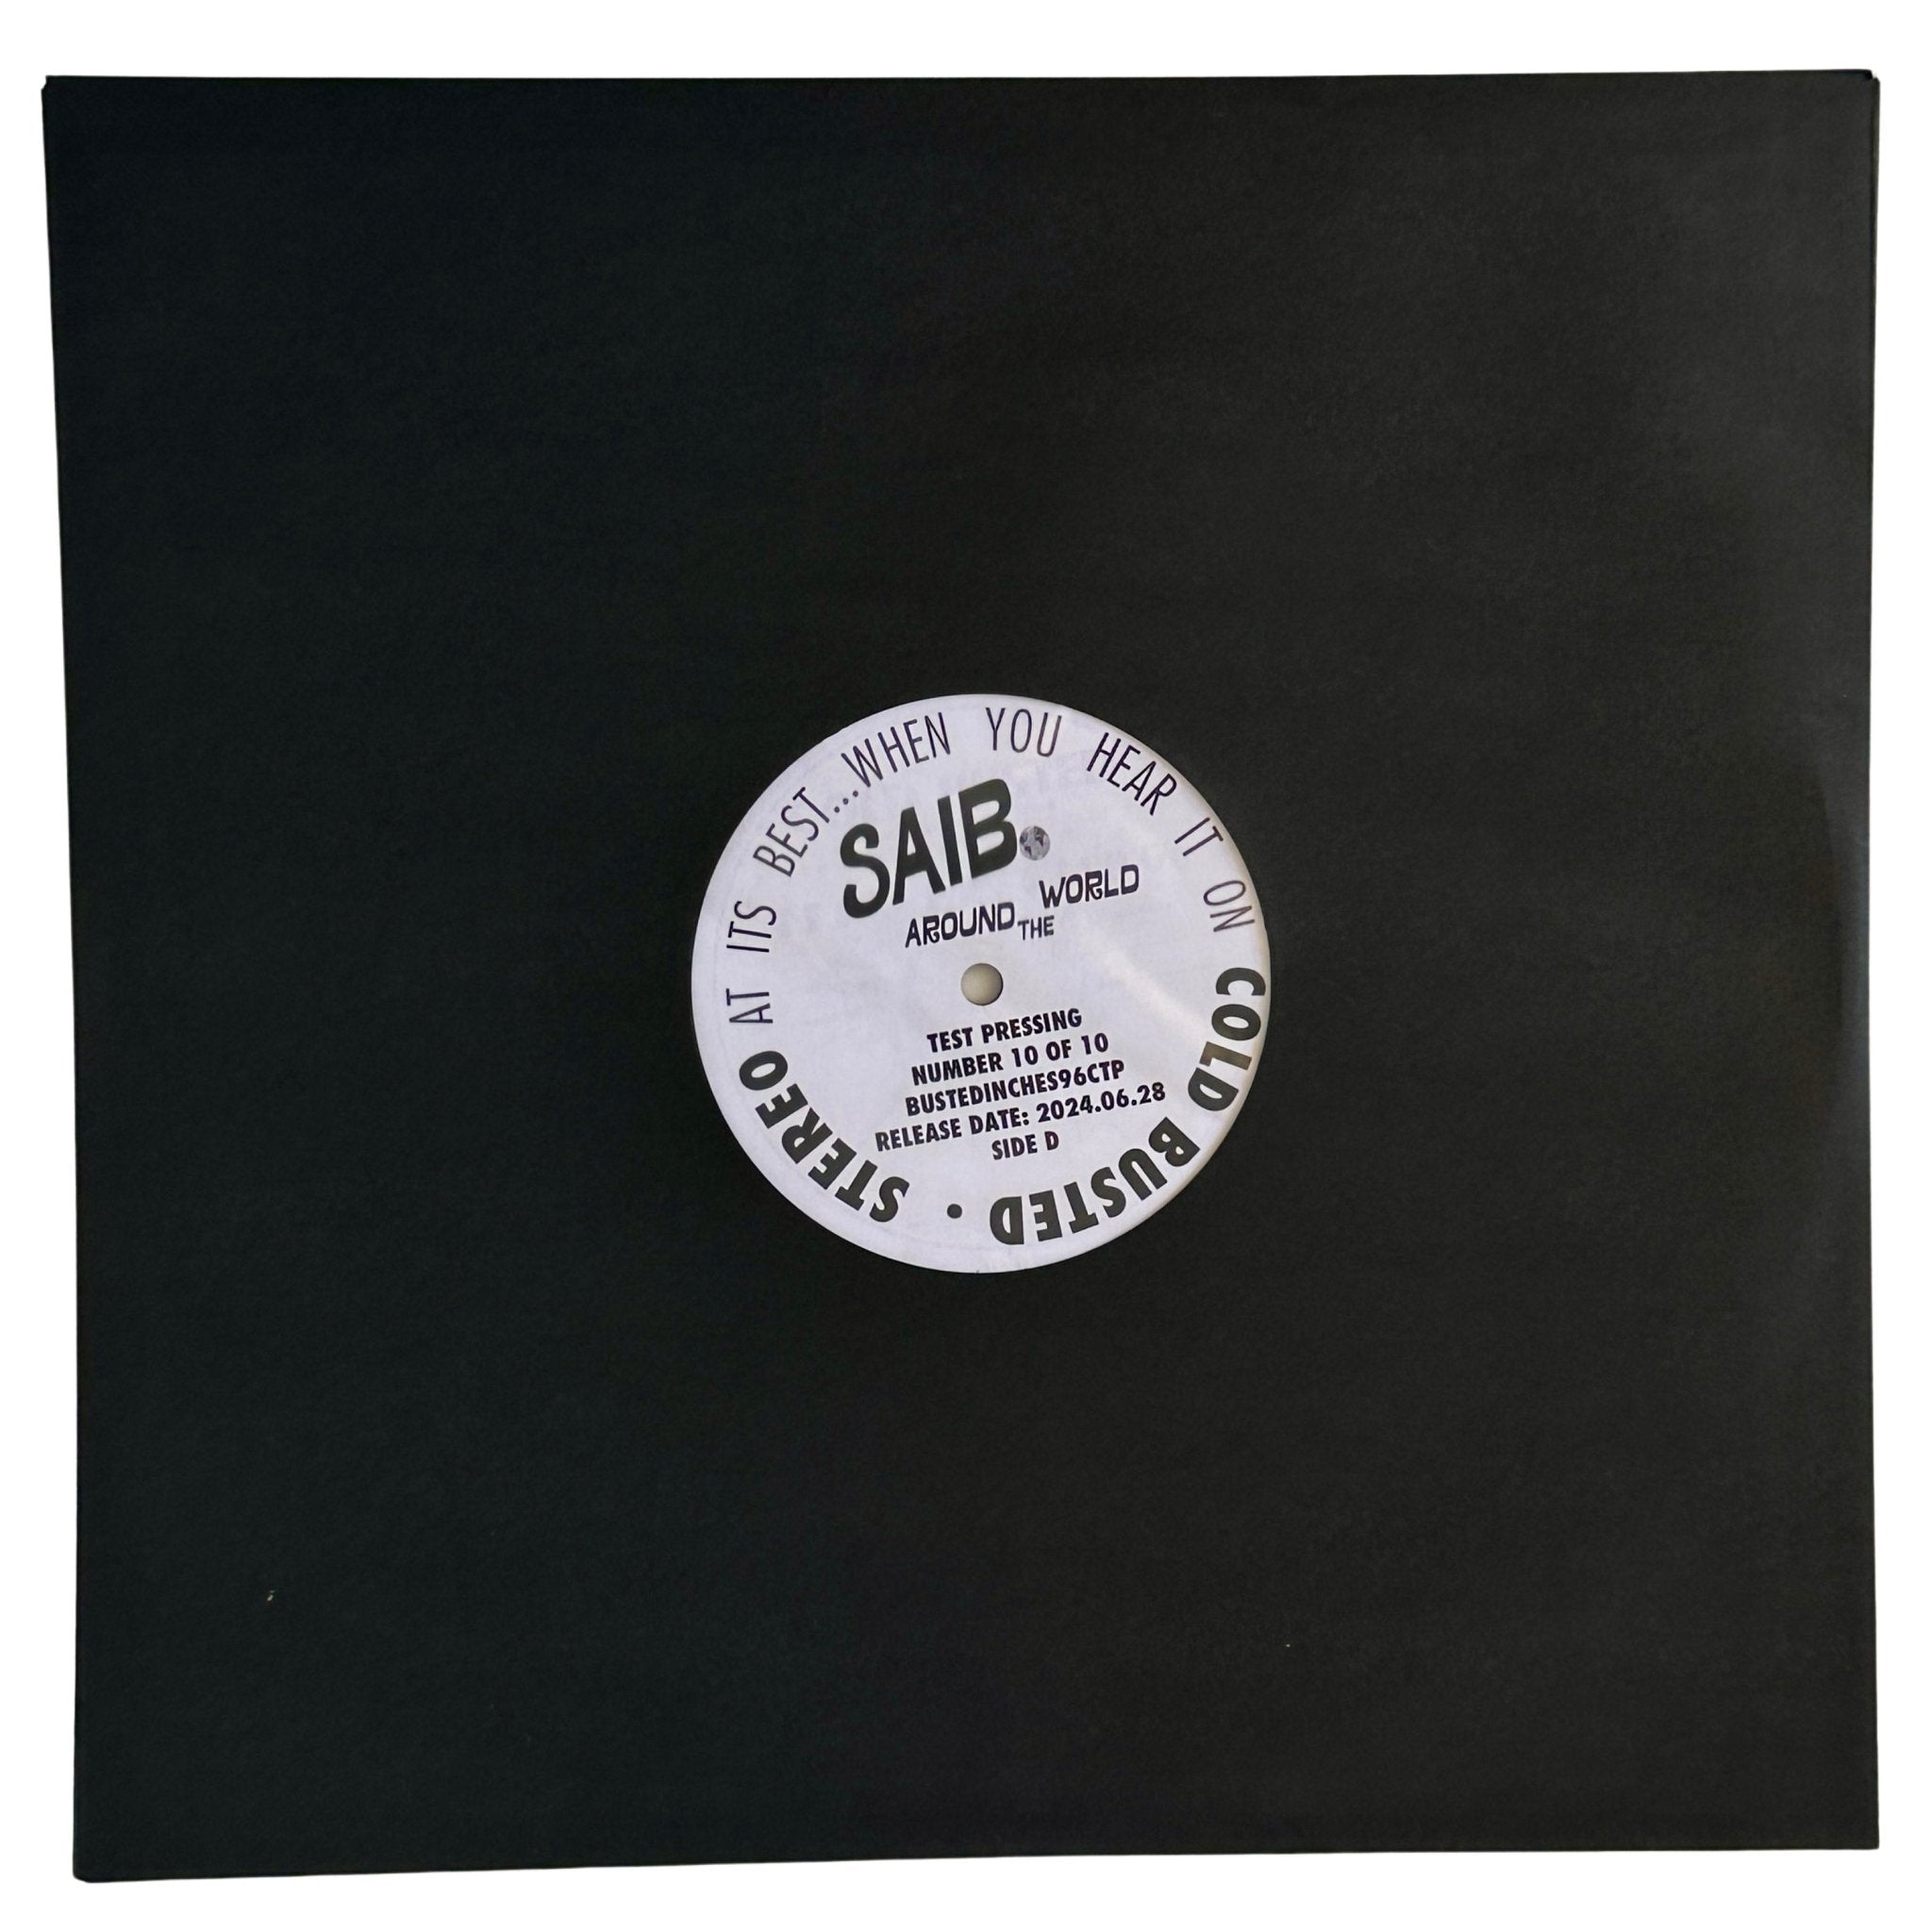 saib. - Around The World (Remastered) - Limited Edition Double 12 Inch Vinyl Test Pressing Repress - COLD BUSTED